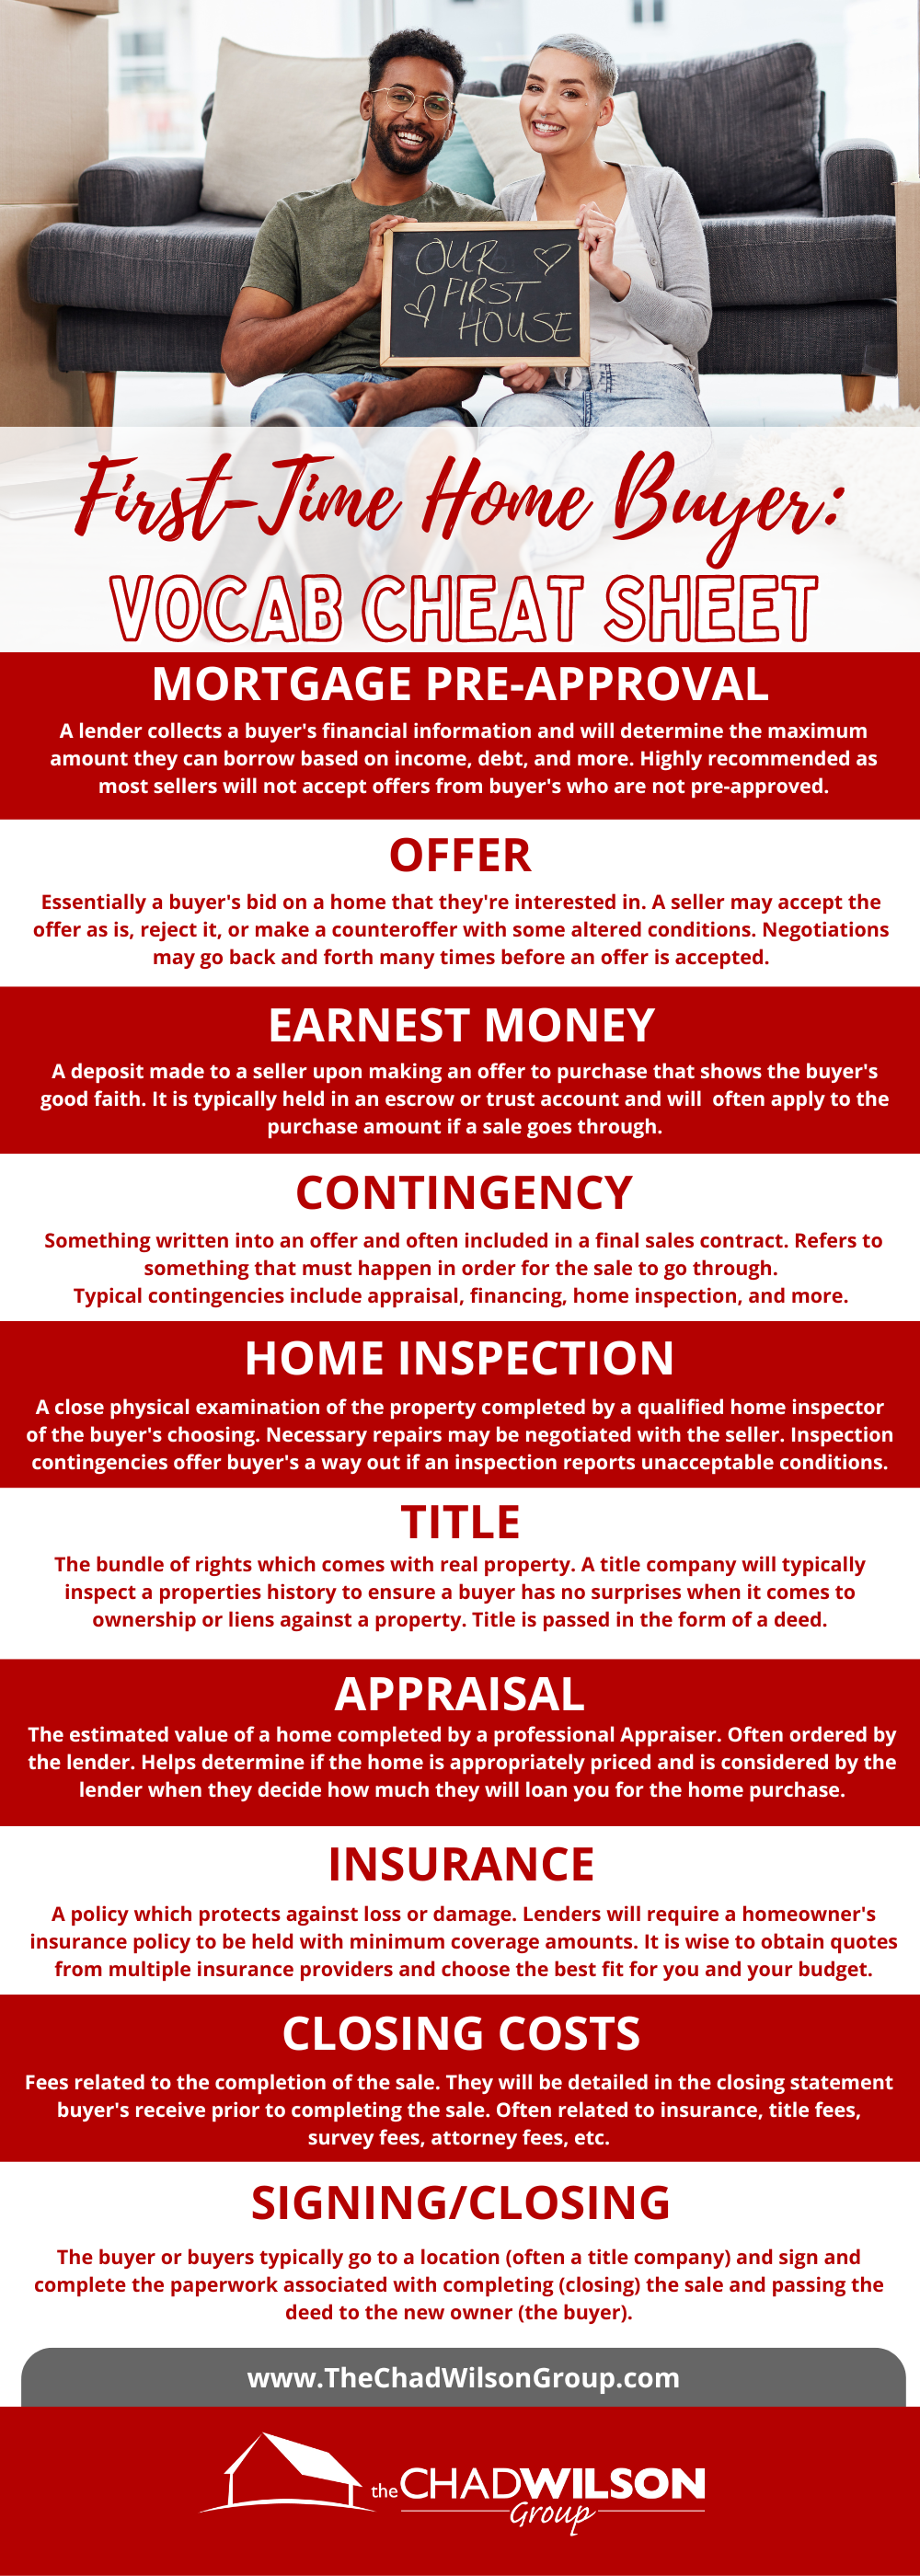 First-Time Home Buyer: Vocab Cheat Sheet